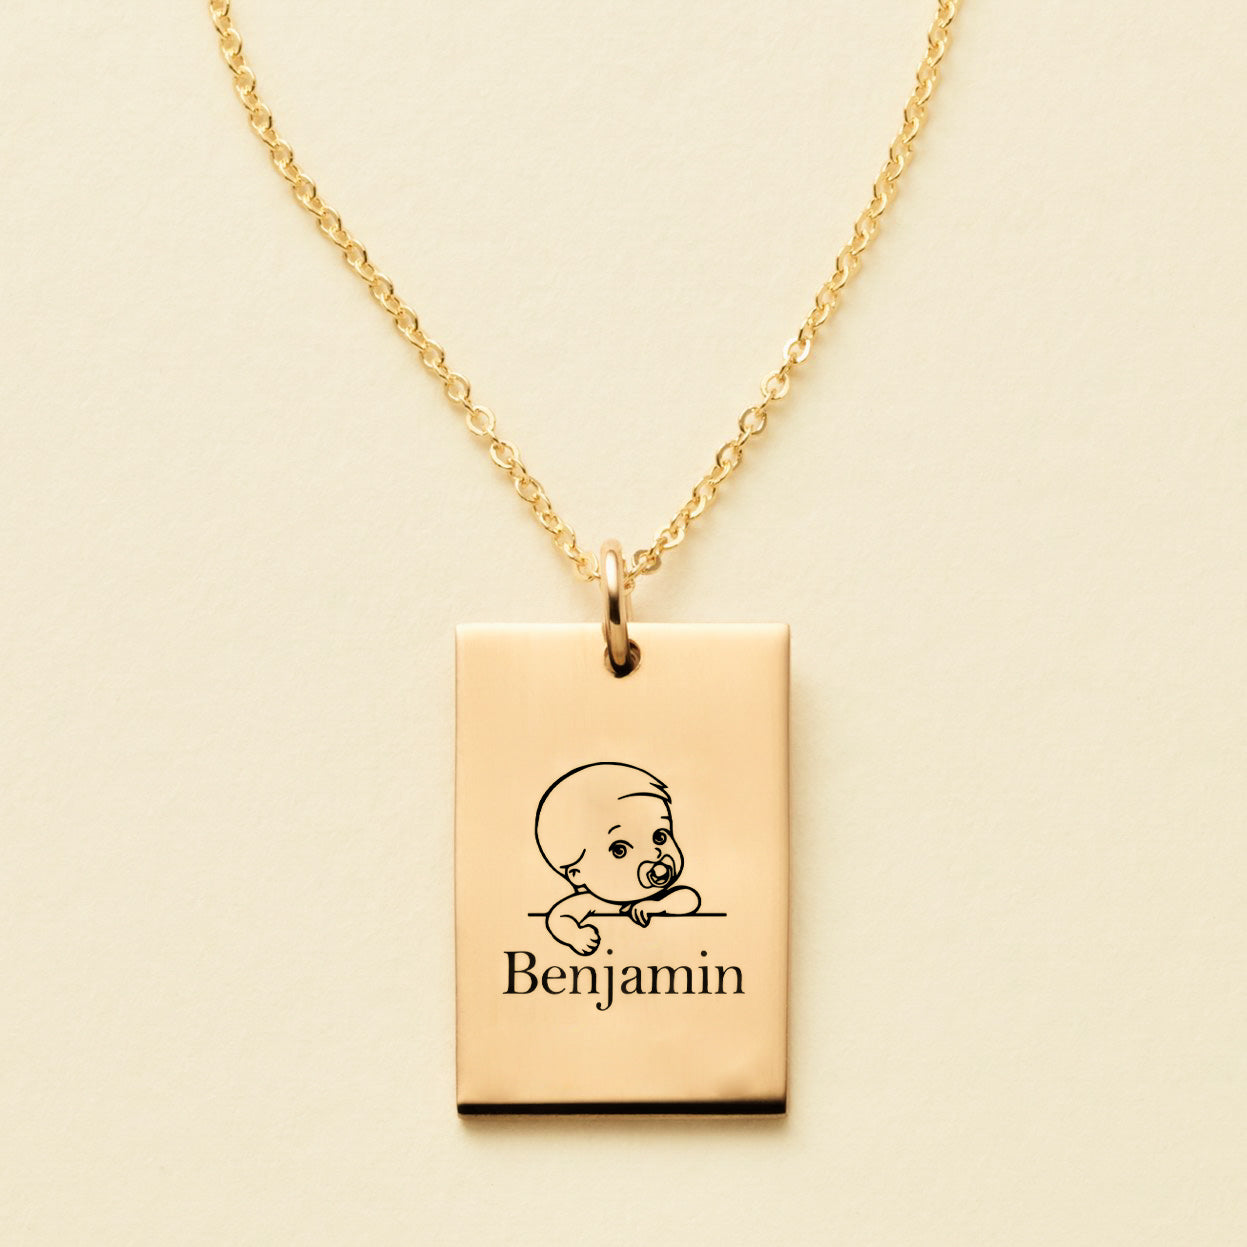 MY BABY ENGRAVED NAME NECKLACE